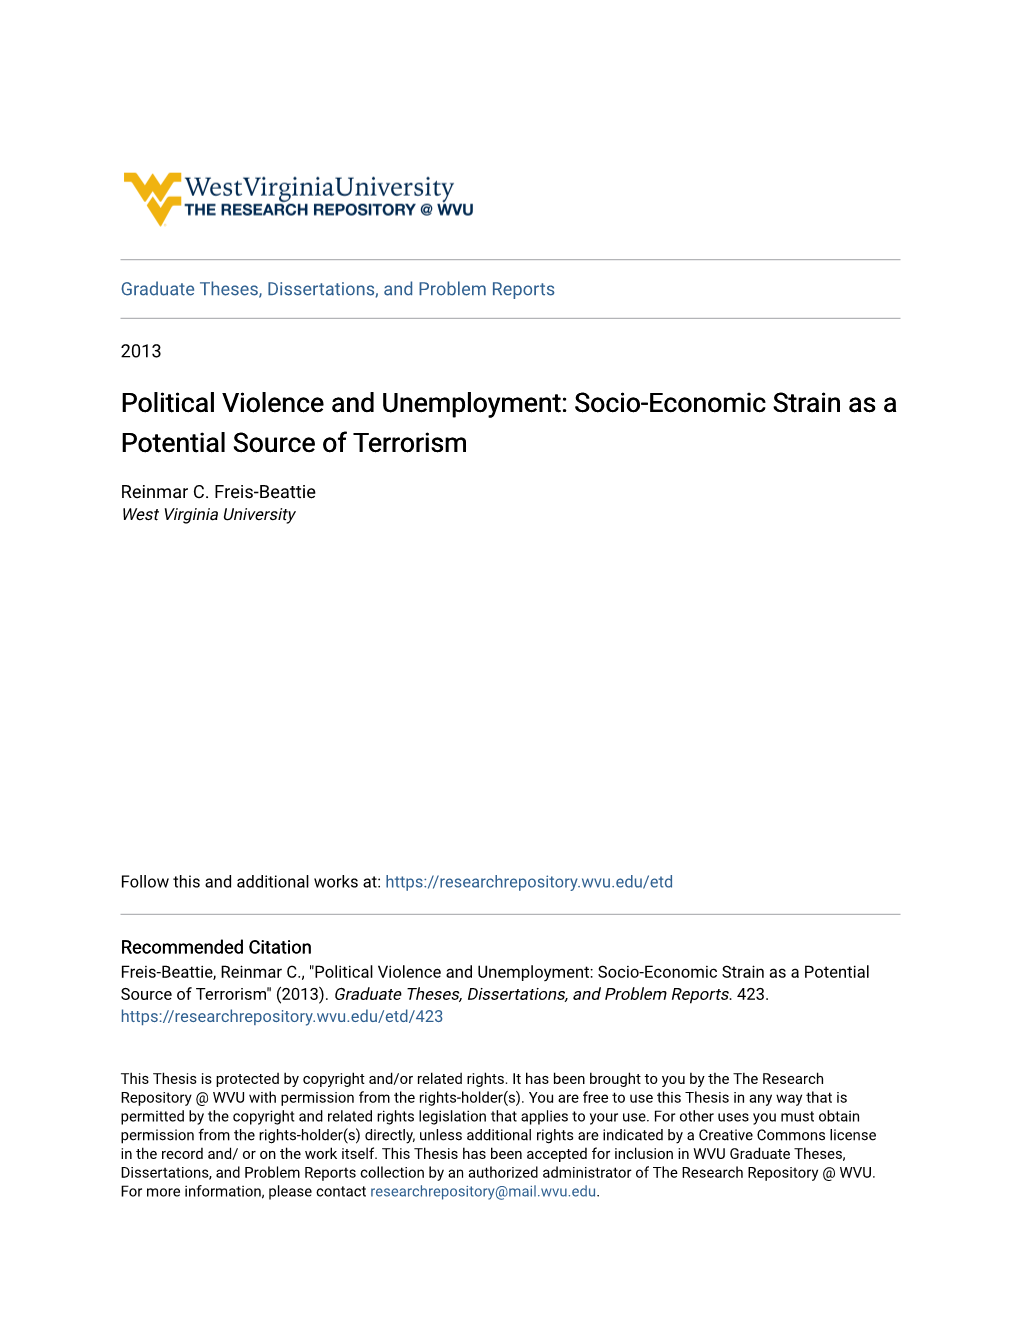 Political Violence and Unemployment: Socio-Economic Strain As a Potential Source of Terrorism